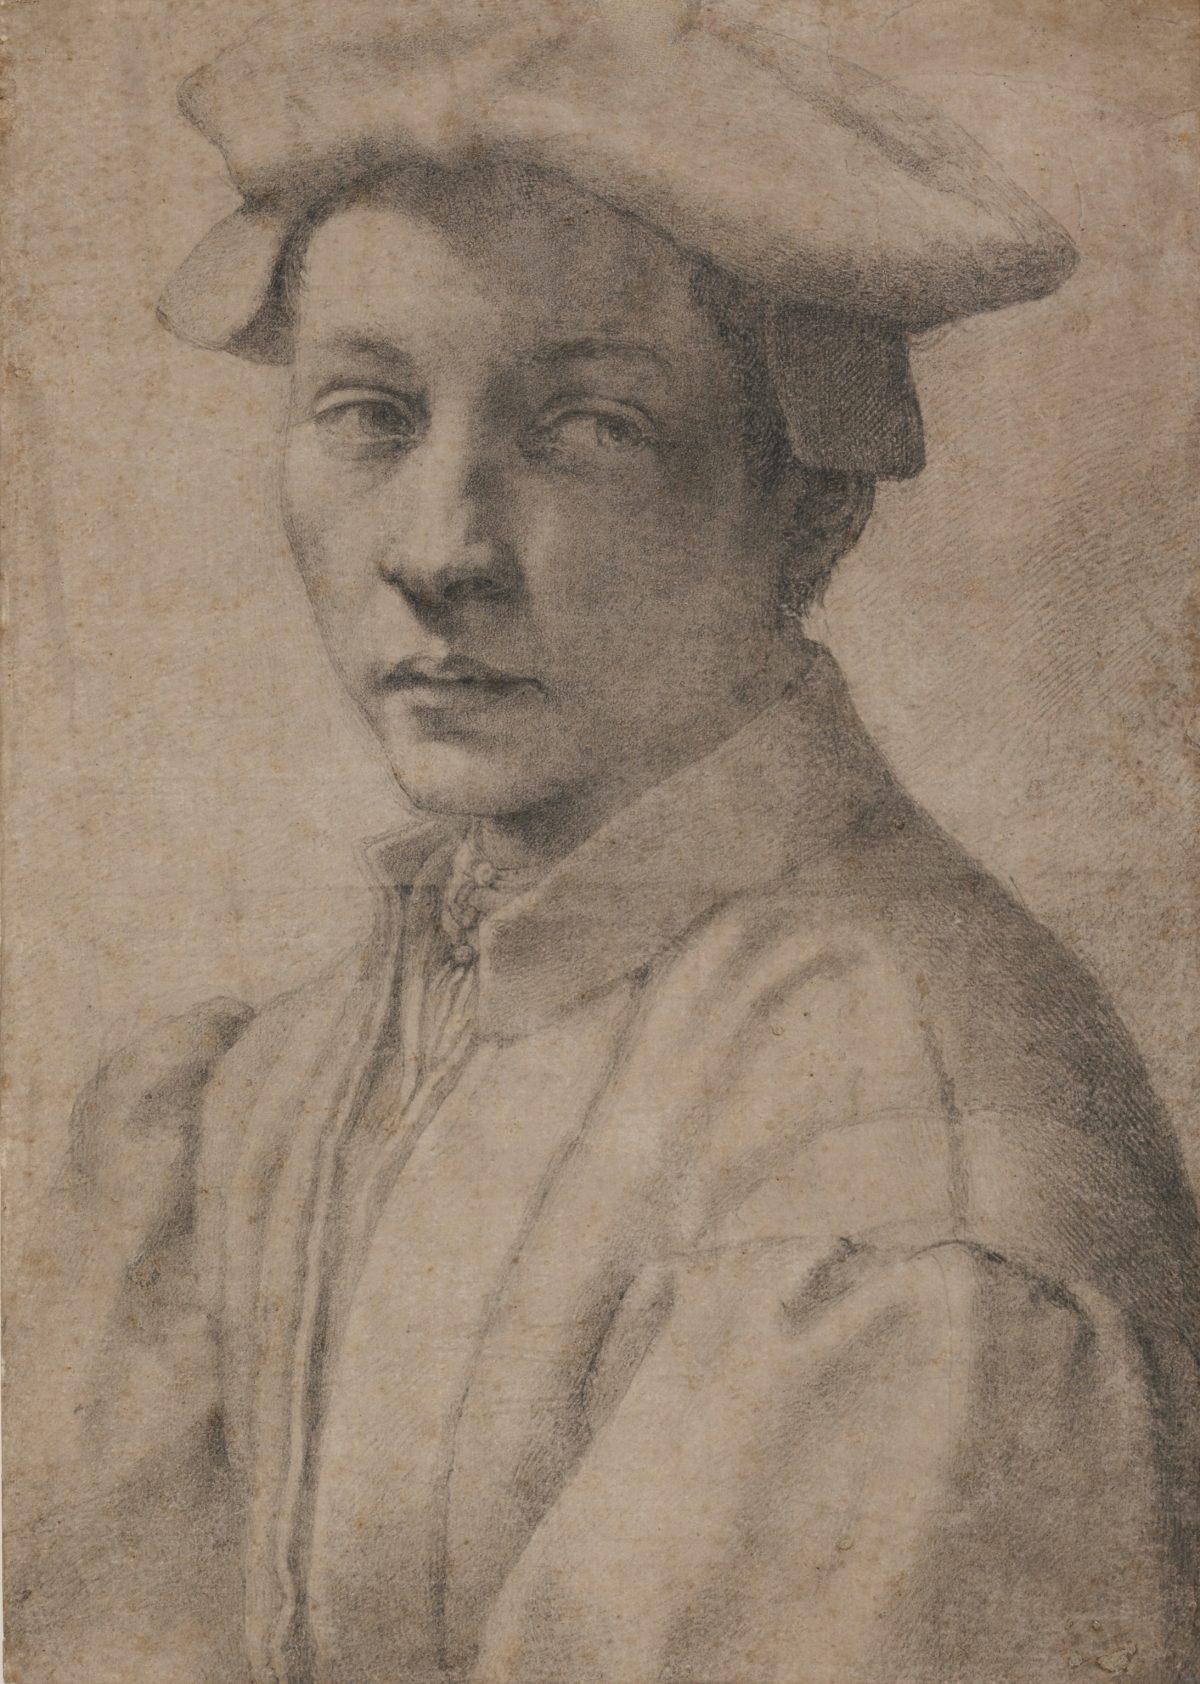 Portrait of Andrea Quaratesi, 1532, by Michelangelo Buonarroti (1475–1564). Drawing, black chalk. 16 3/16 inches by 11 ½ inches. (The British Museum, London)